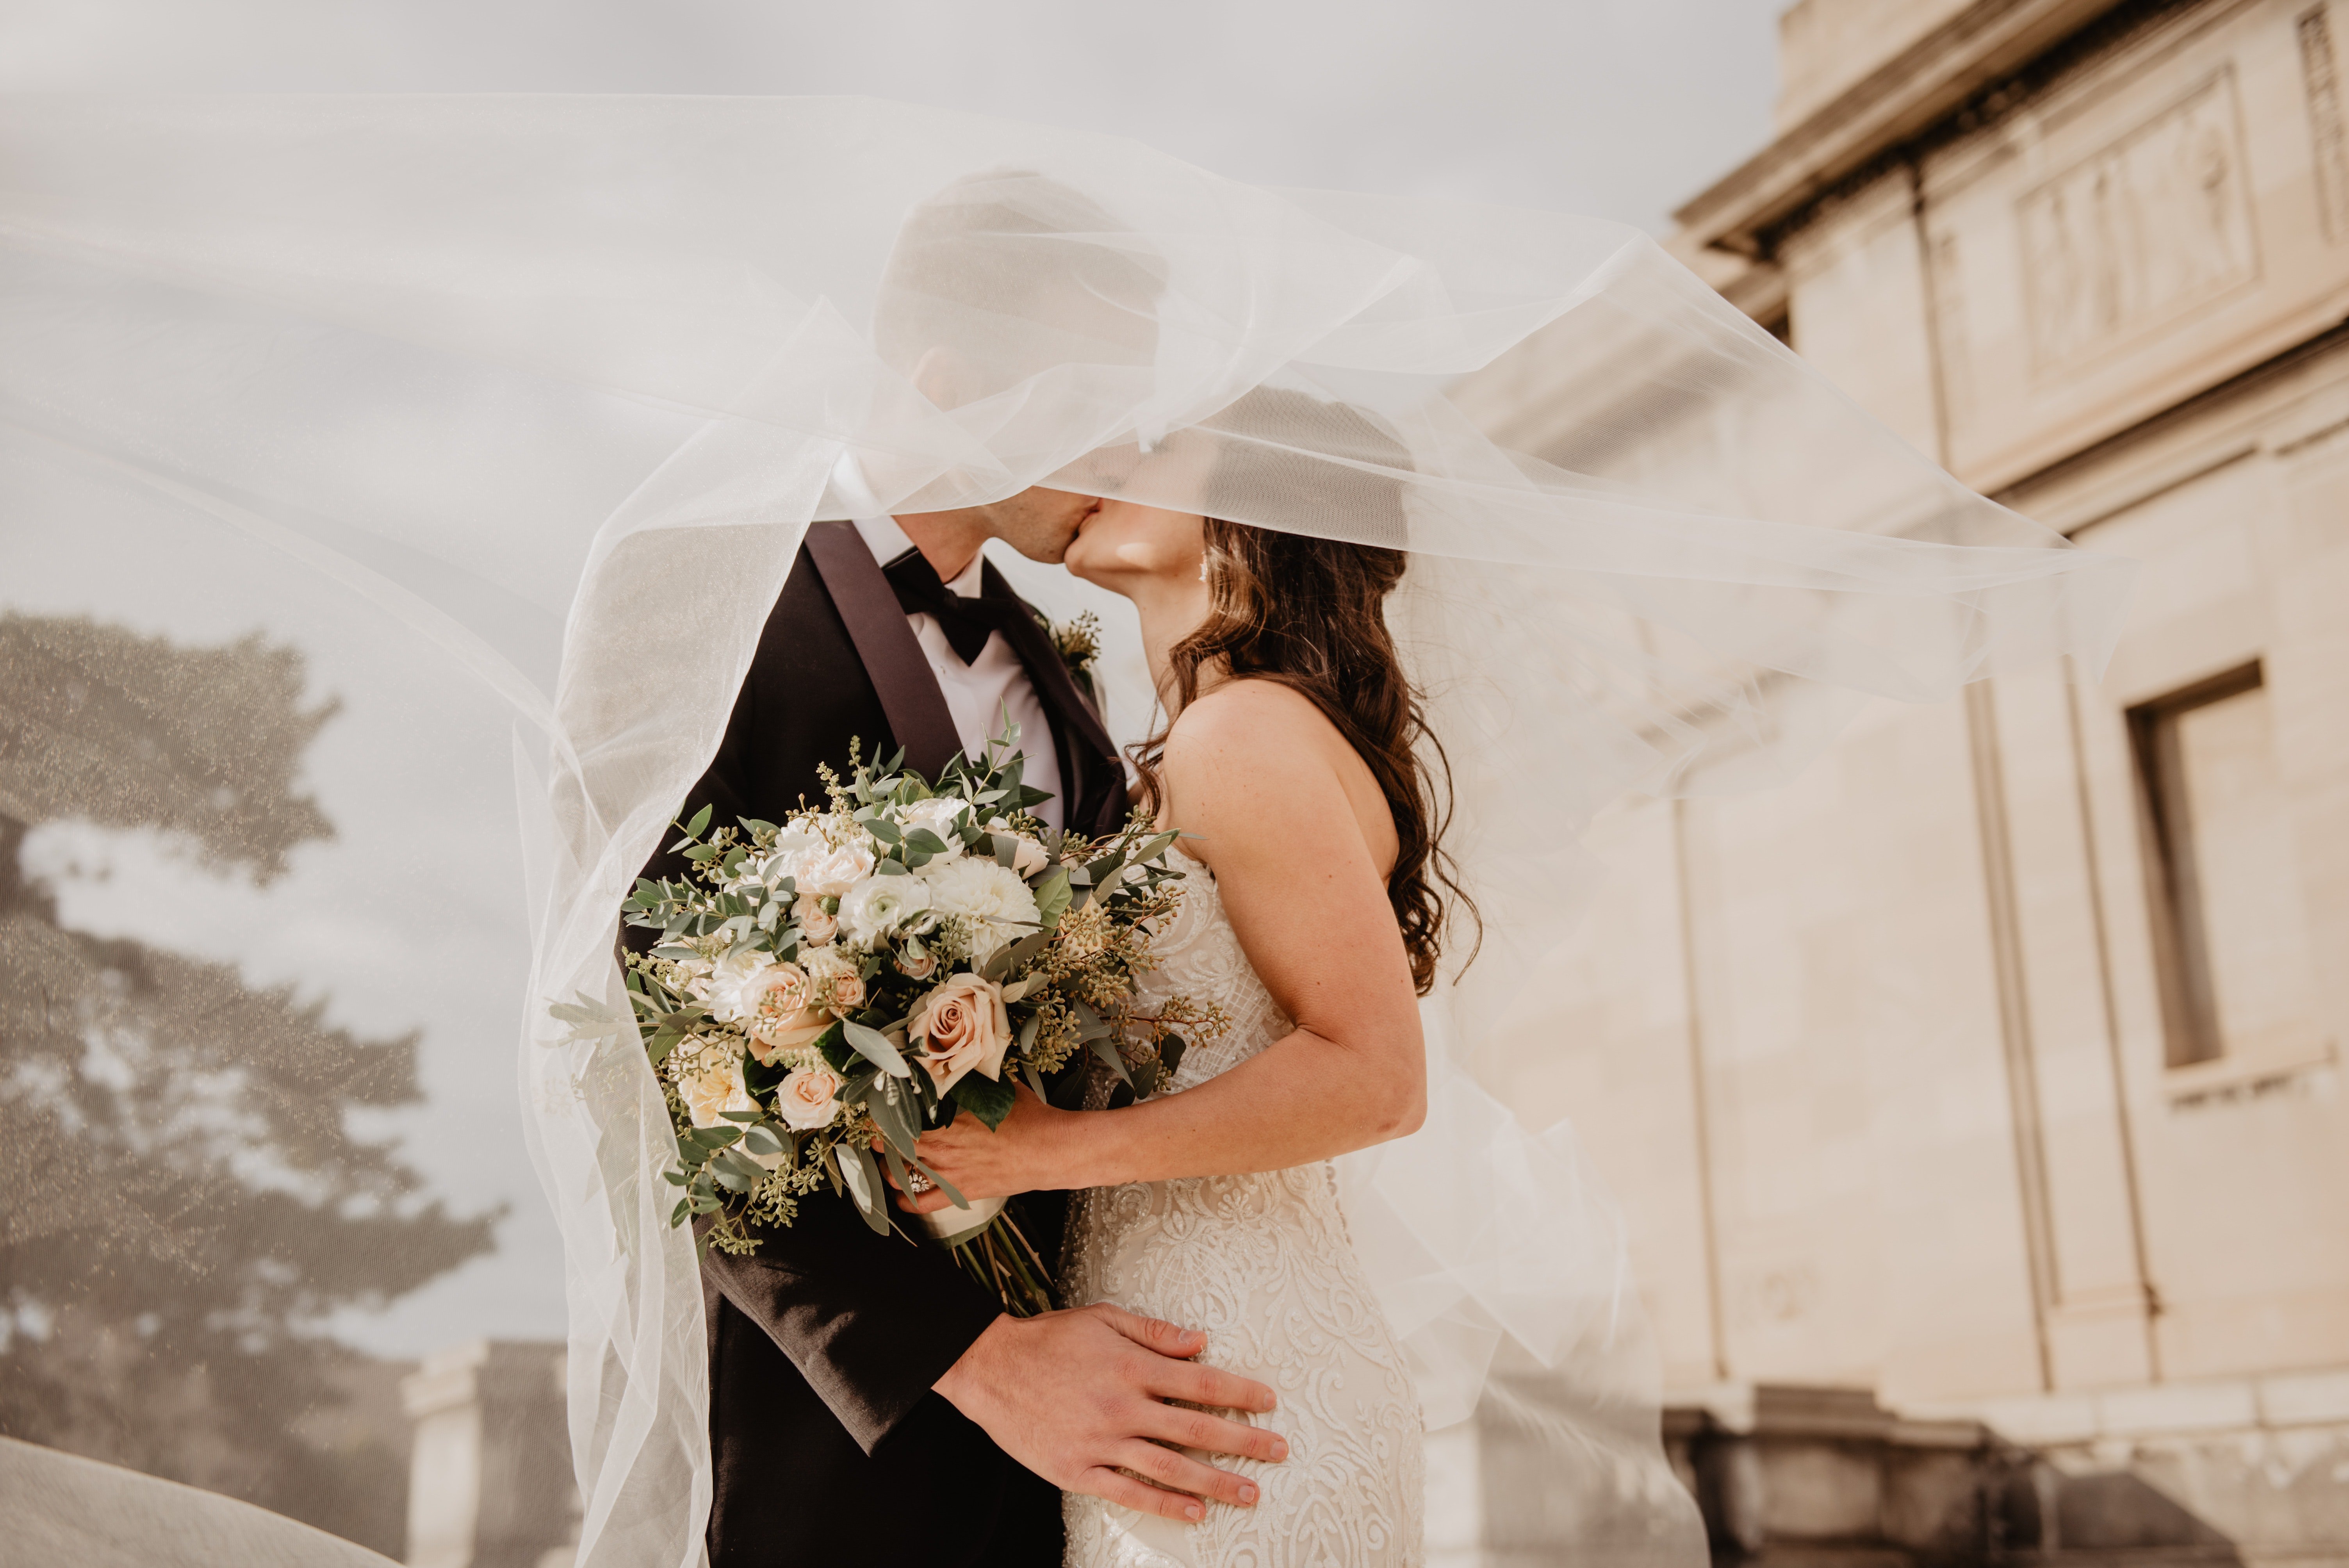 Richard and Angela tied the knot | Photo: Pexels